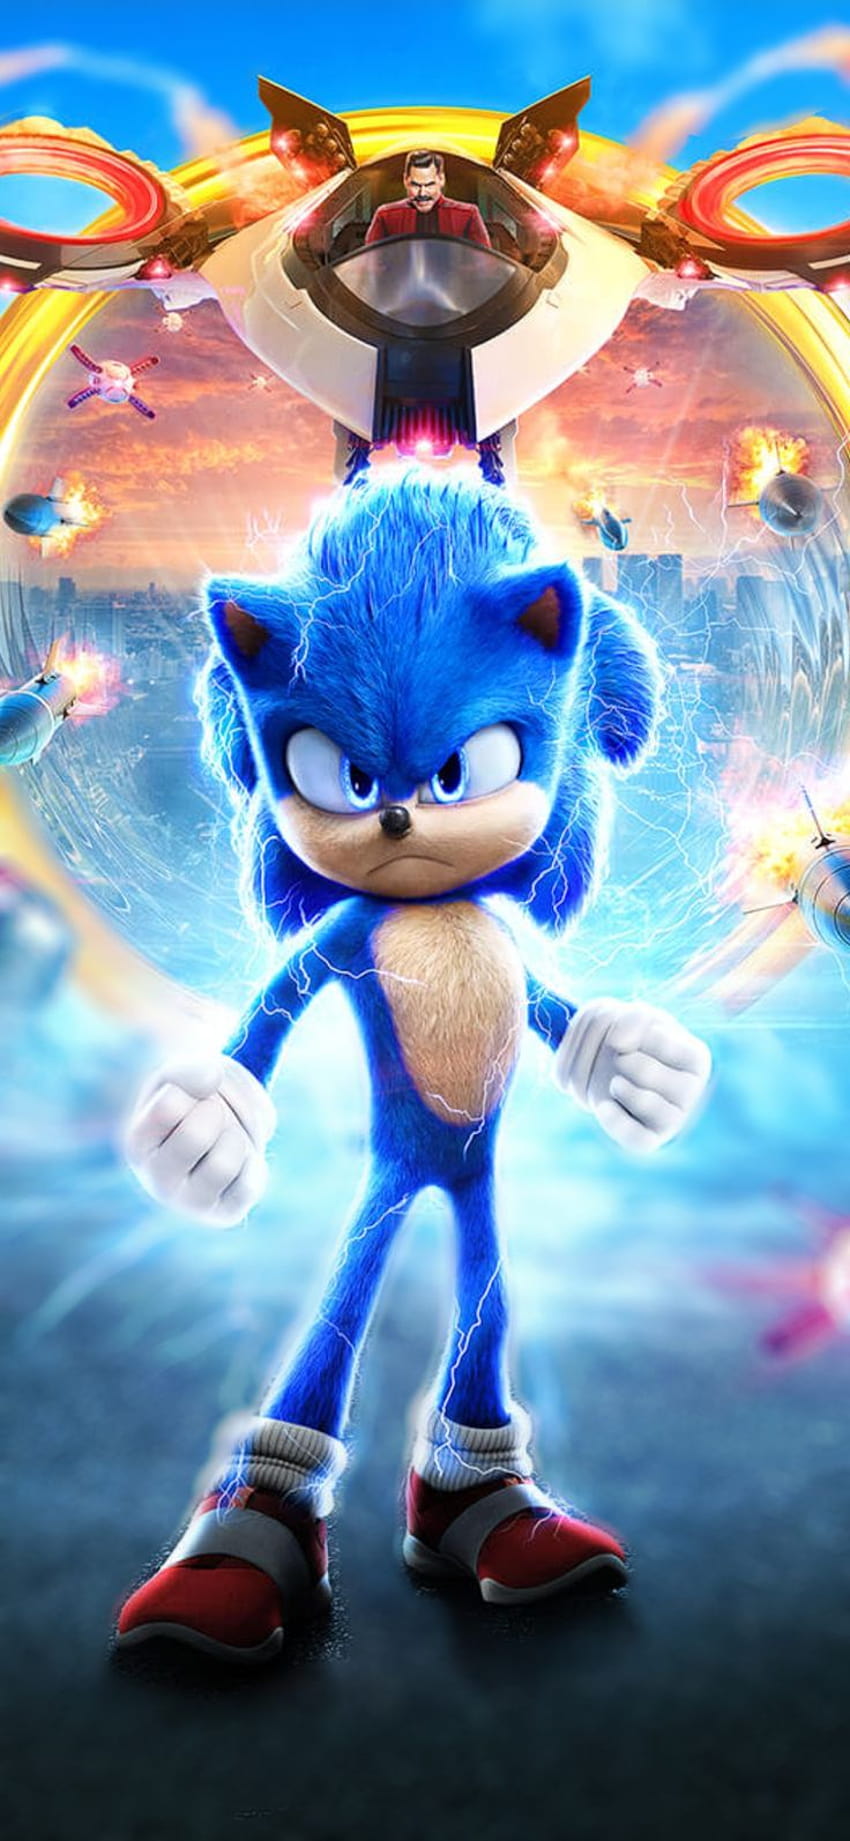 Sonic The Hedgehog 2020 Movie HD Movies 4k Wallpapers Images  Backgrounds Photos and Pictures